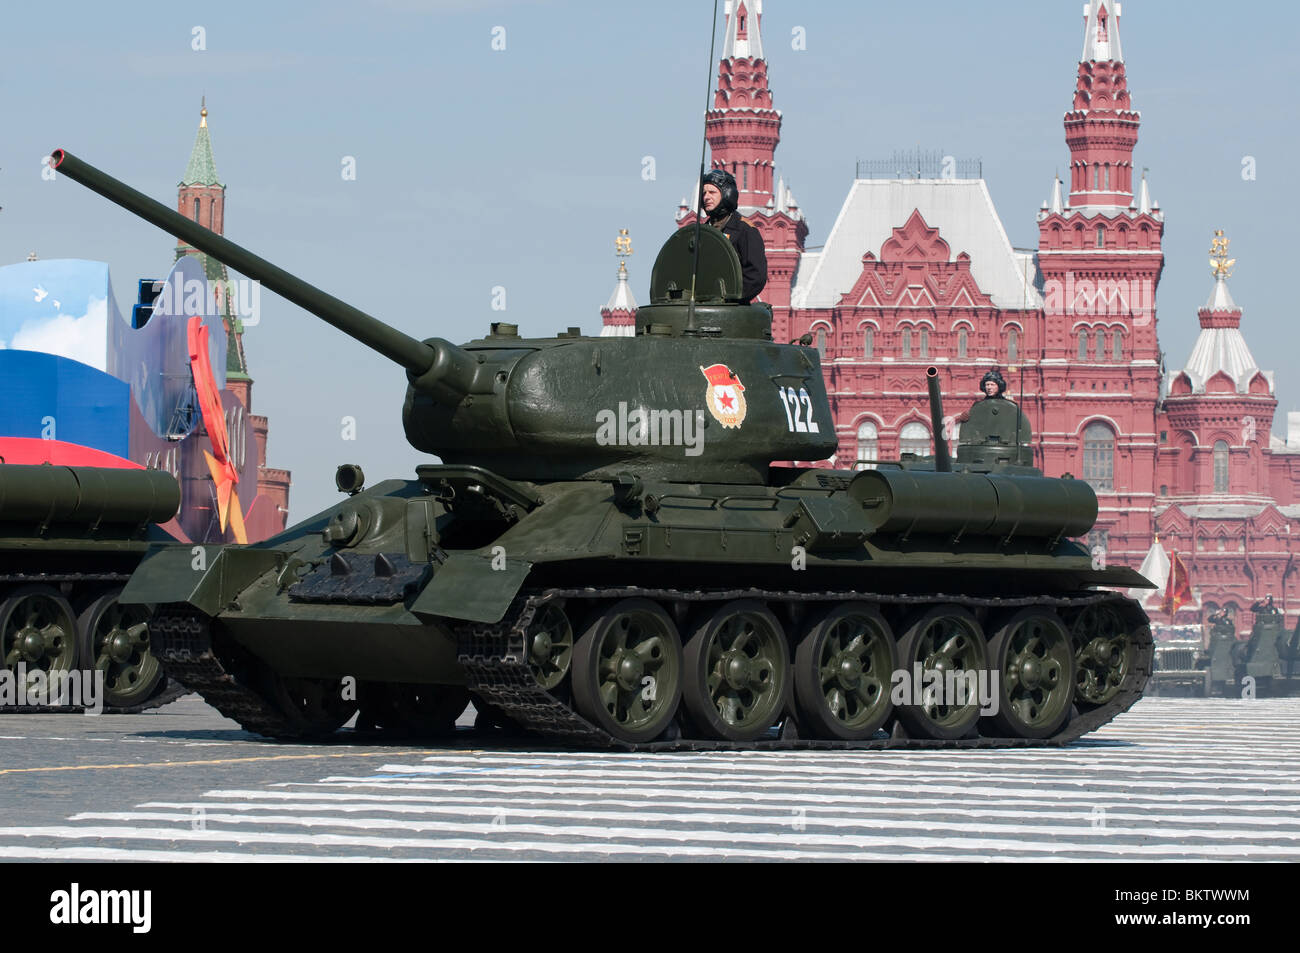 Legendary soviet medium tank T-34 from the Second World War, march along the Red Square Moscow Victory Parade of 2010 Stock Photo